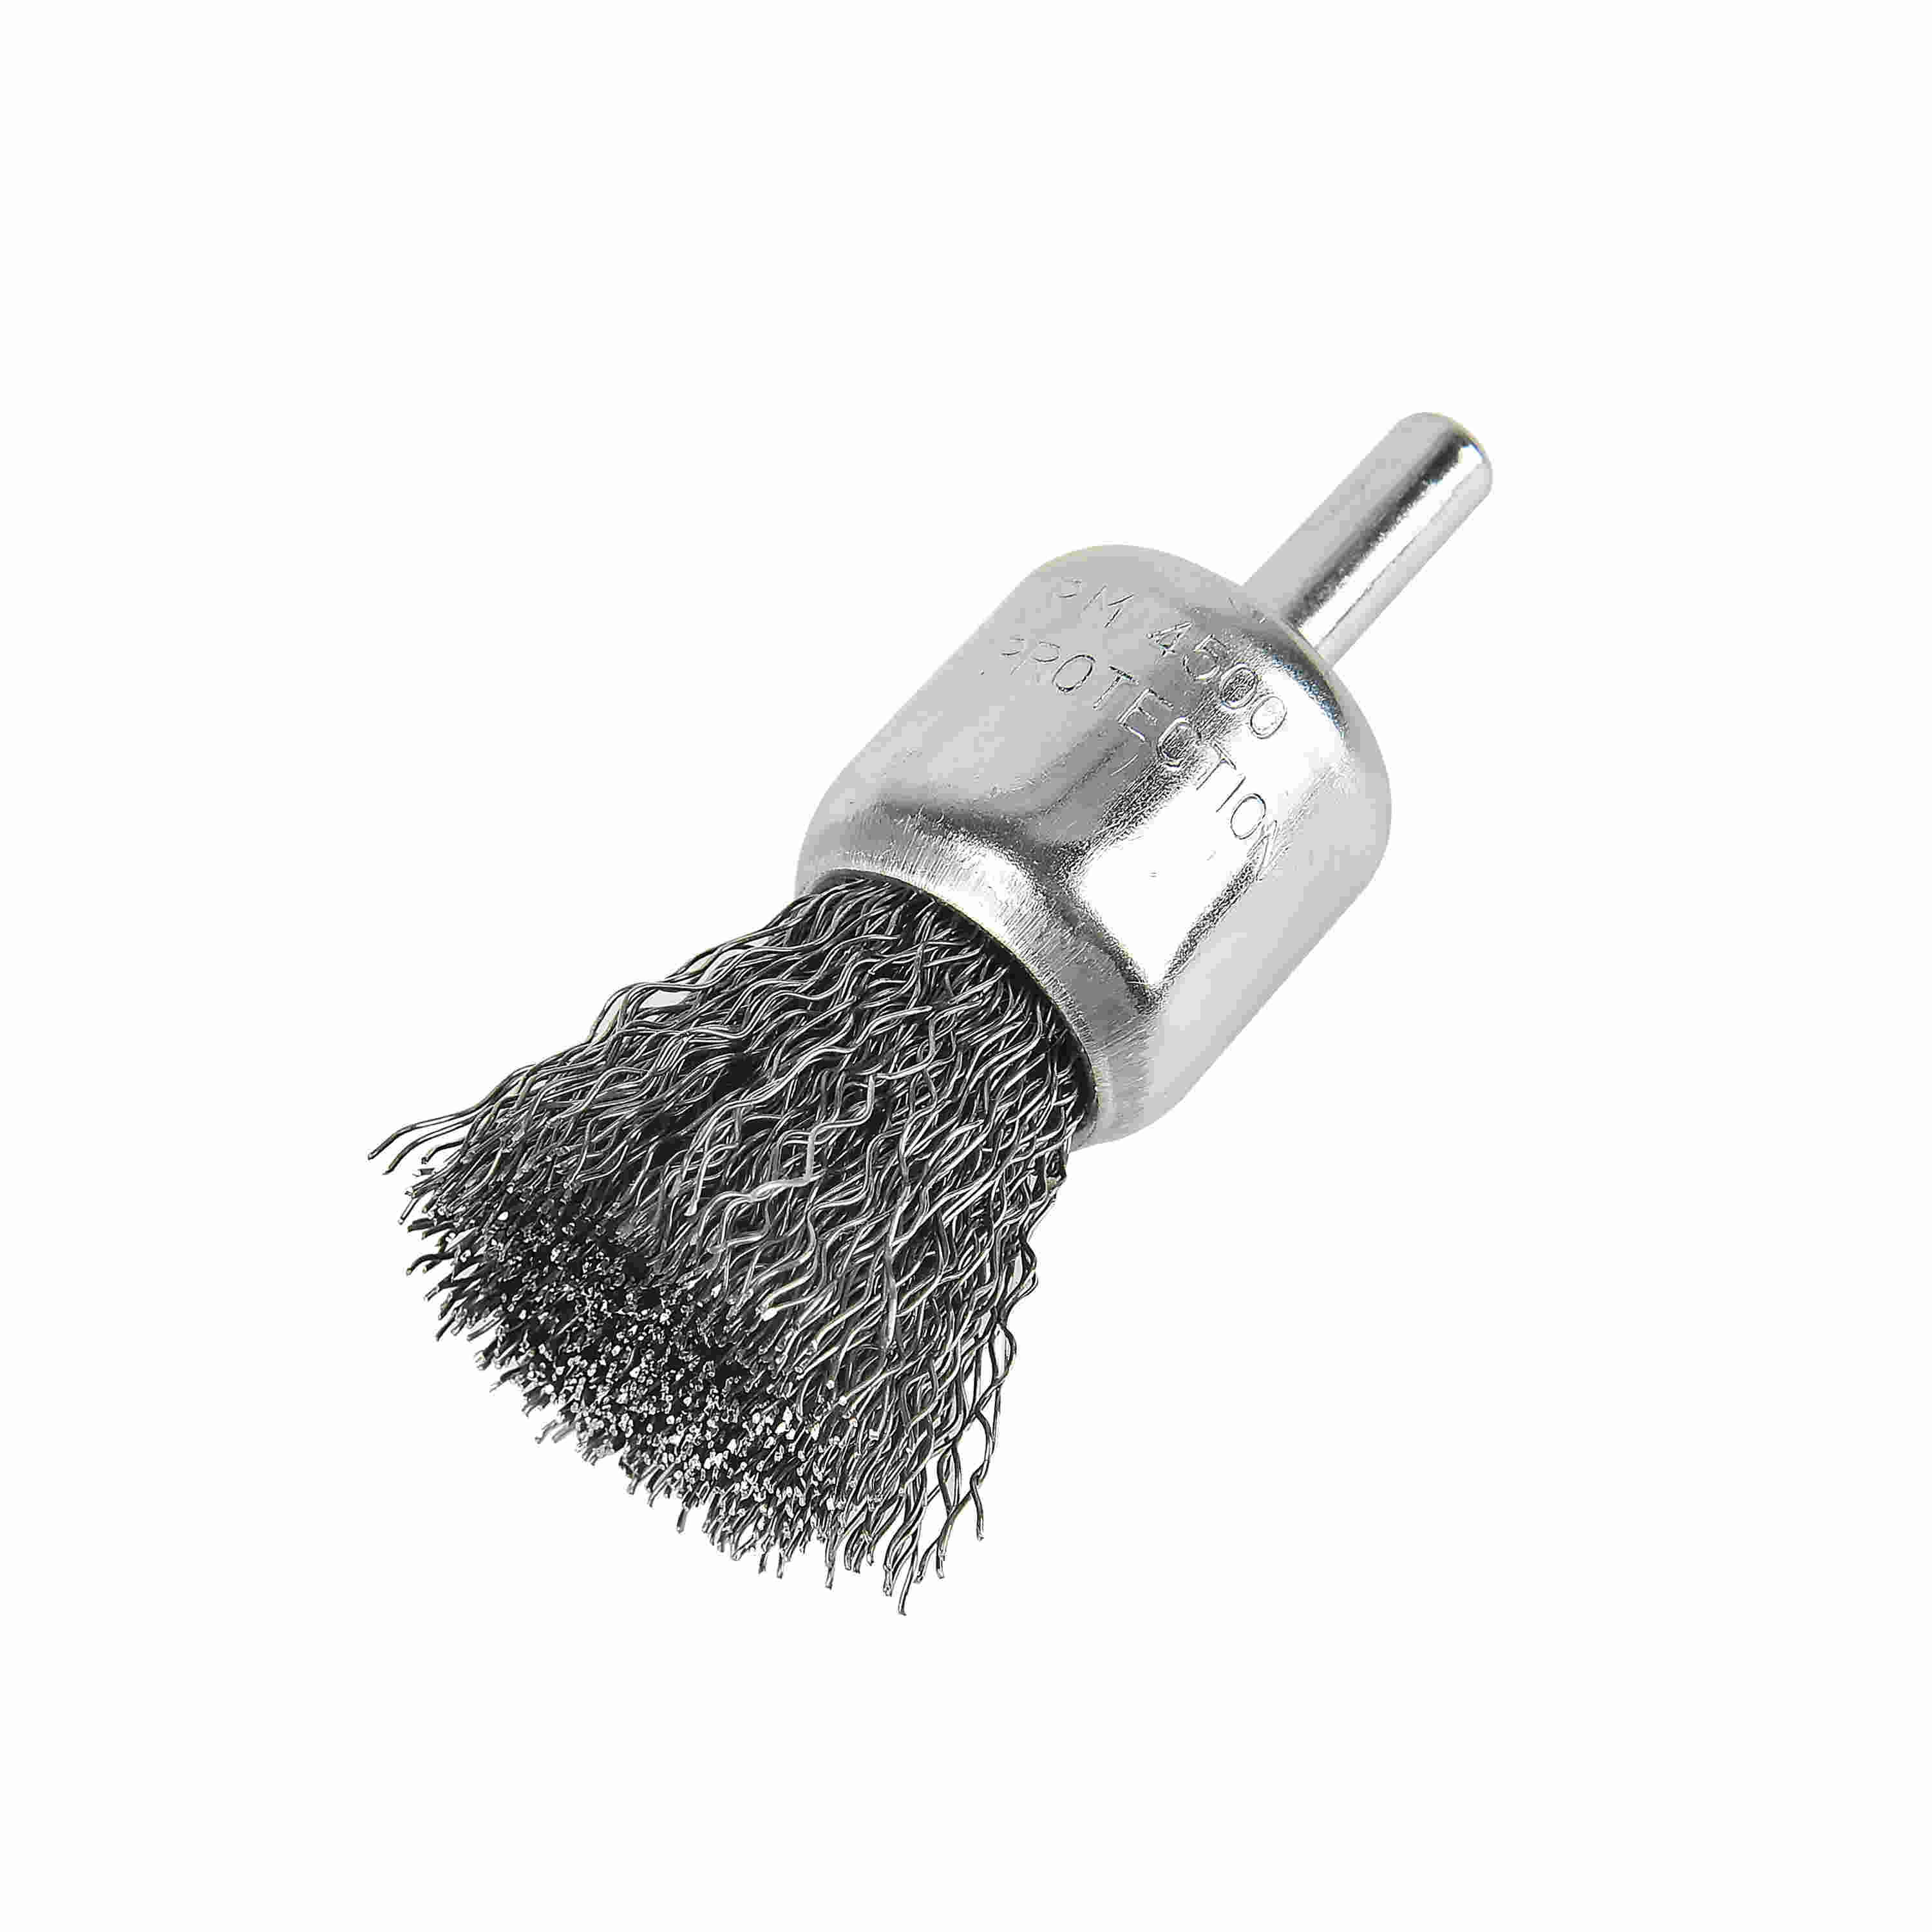 Pneumatic Knotted Wire End Brush for Derusting,Steel Wire Wheel Brush,Paint Removal,Deburring,Fast Easy for Angle Grinder 10 Pack 